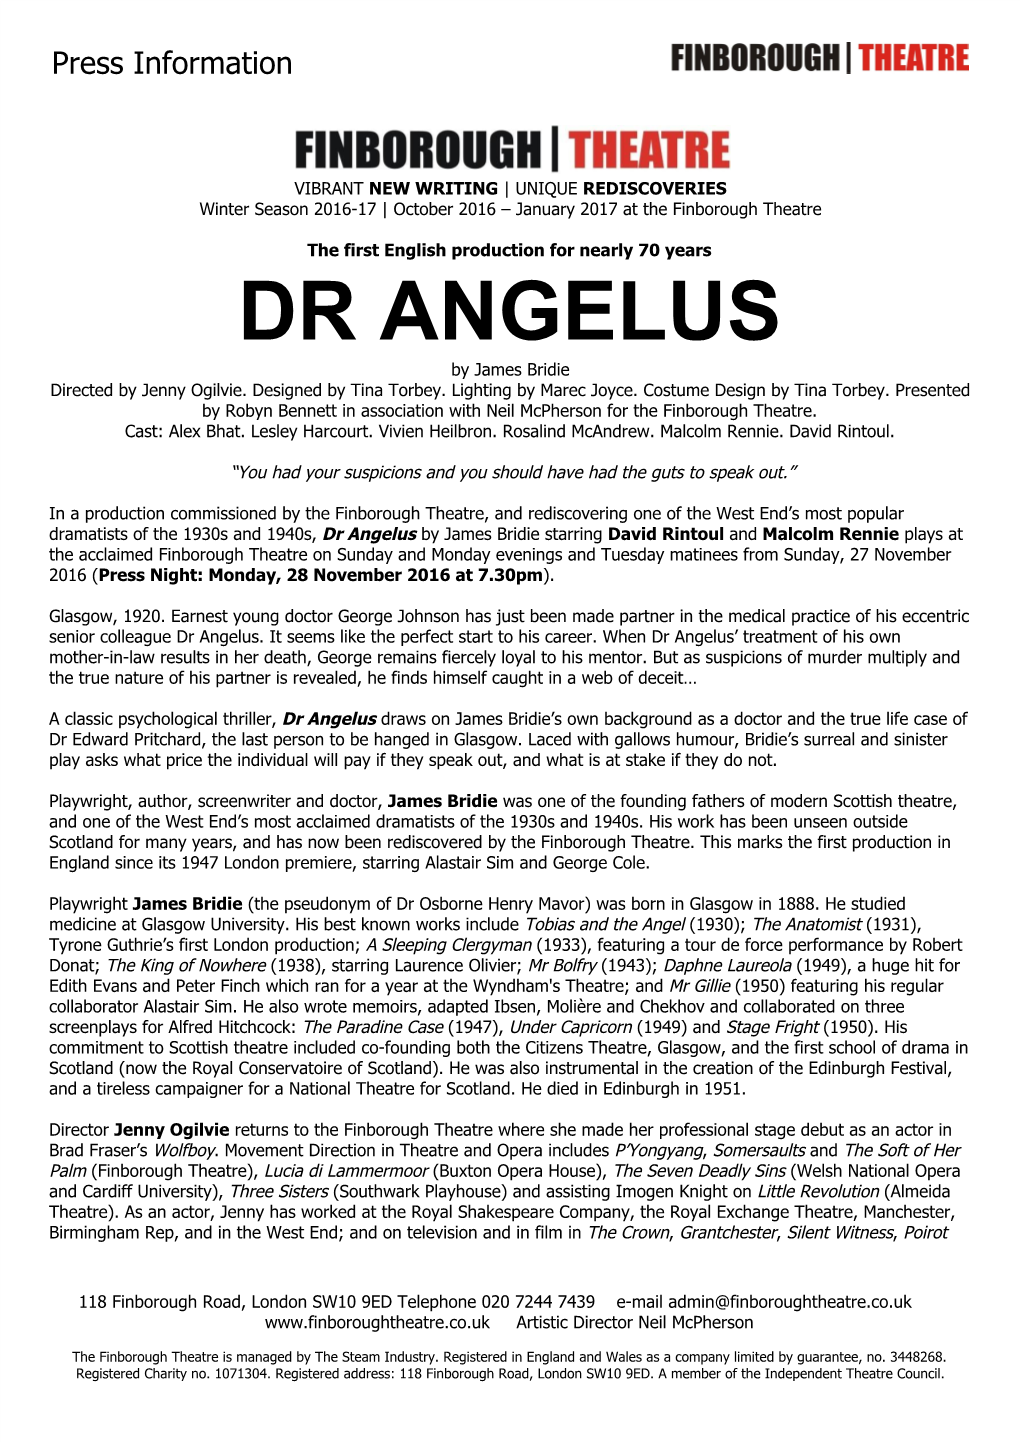 DR ANGELUS by James Bridie Directed by Jenny Ogilvie